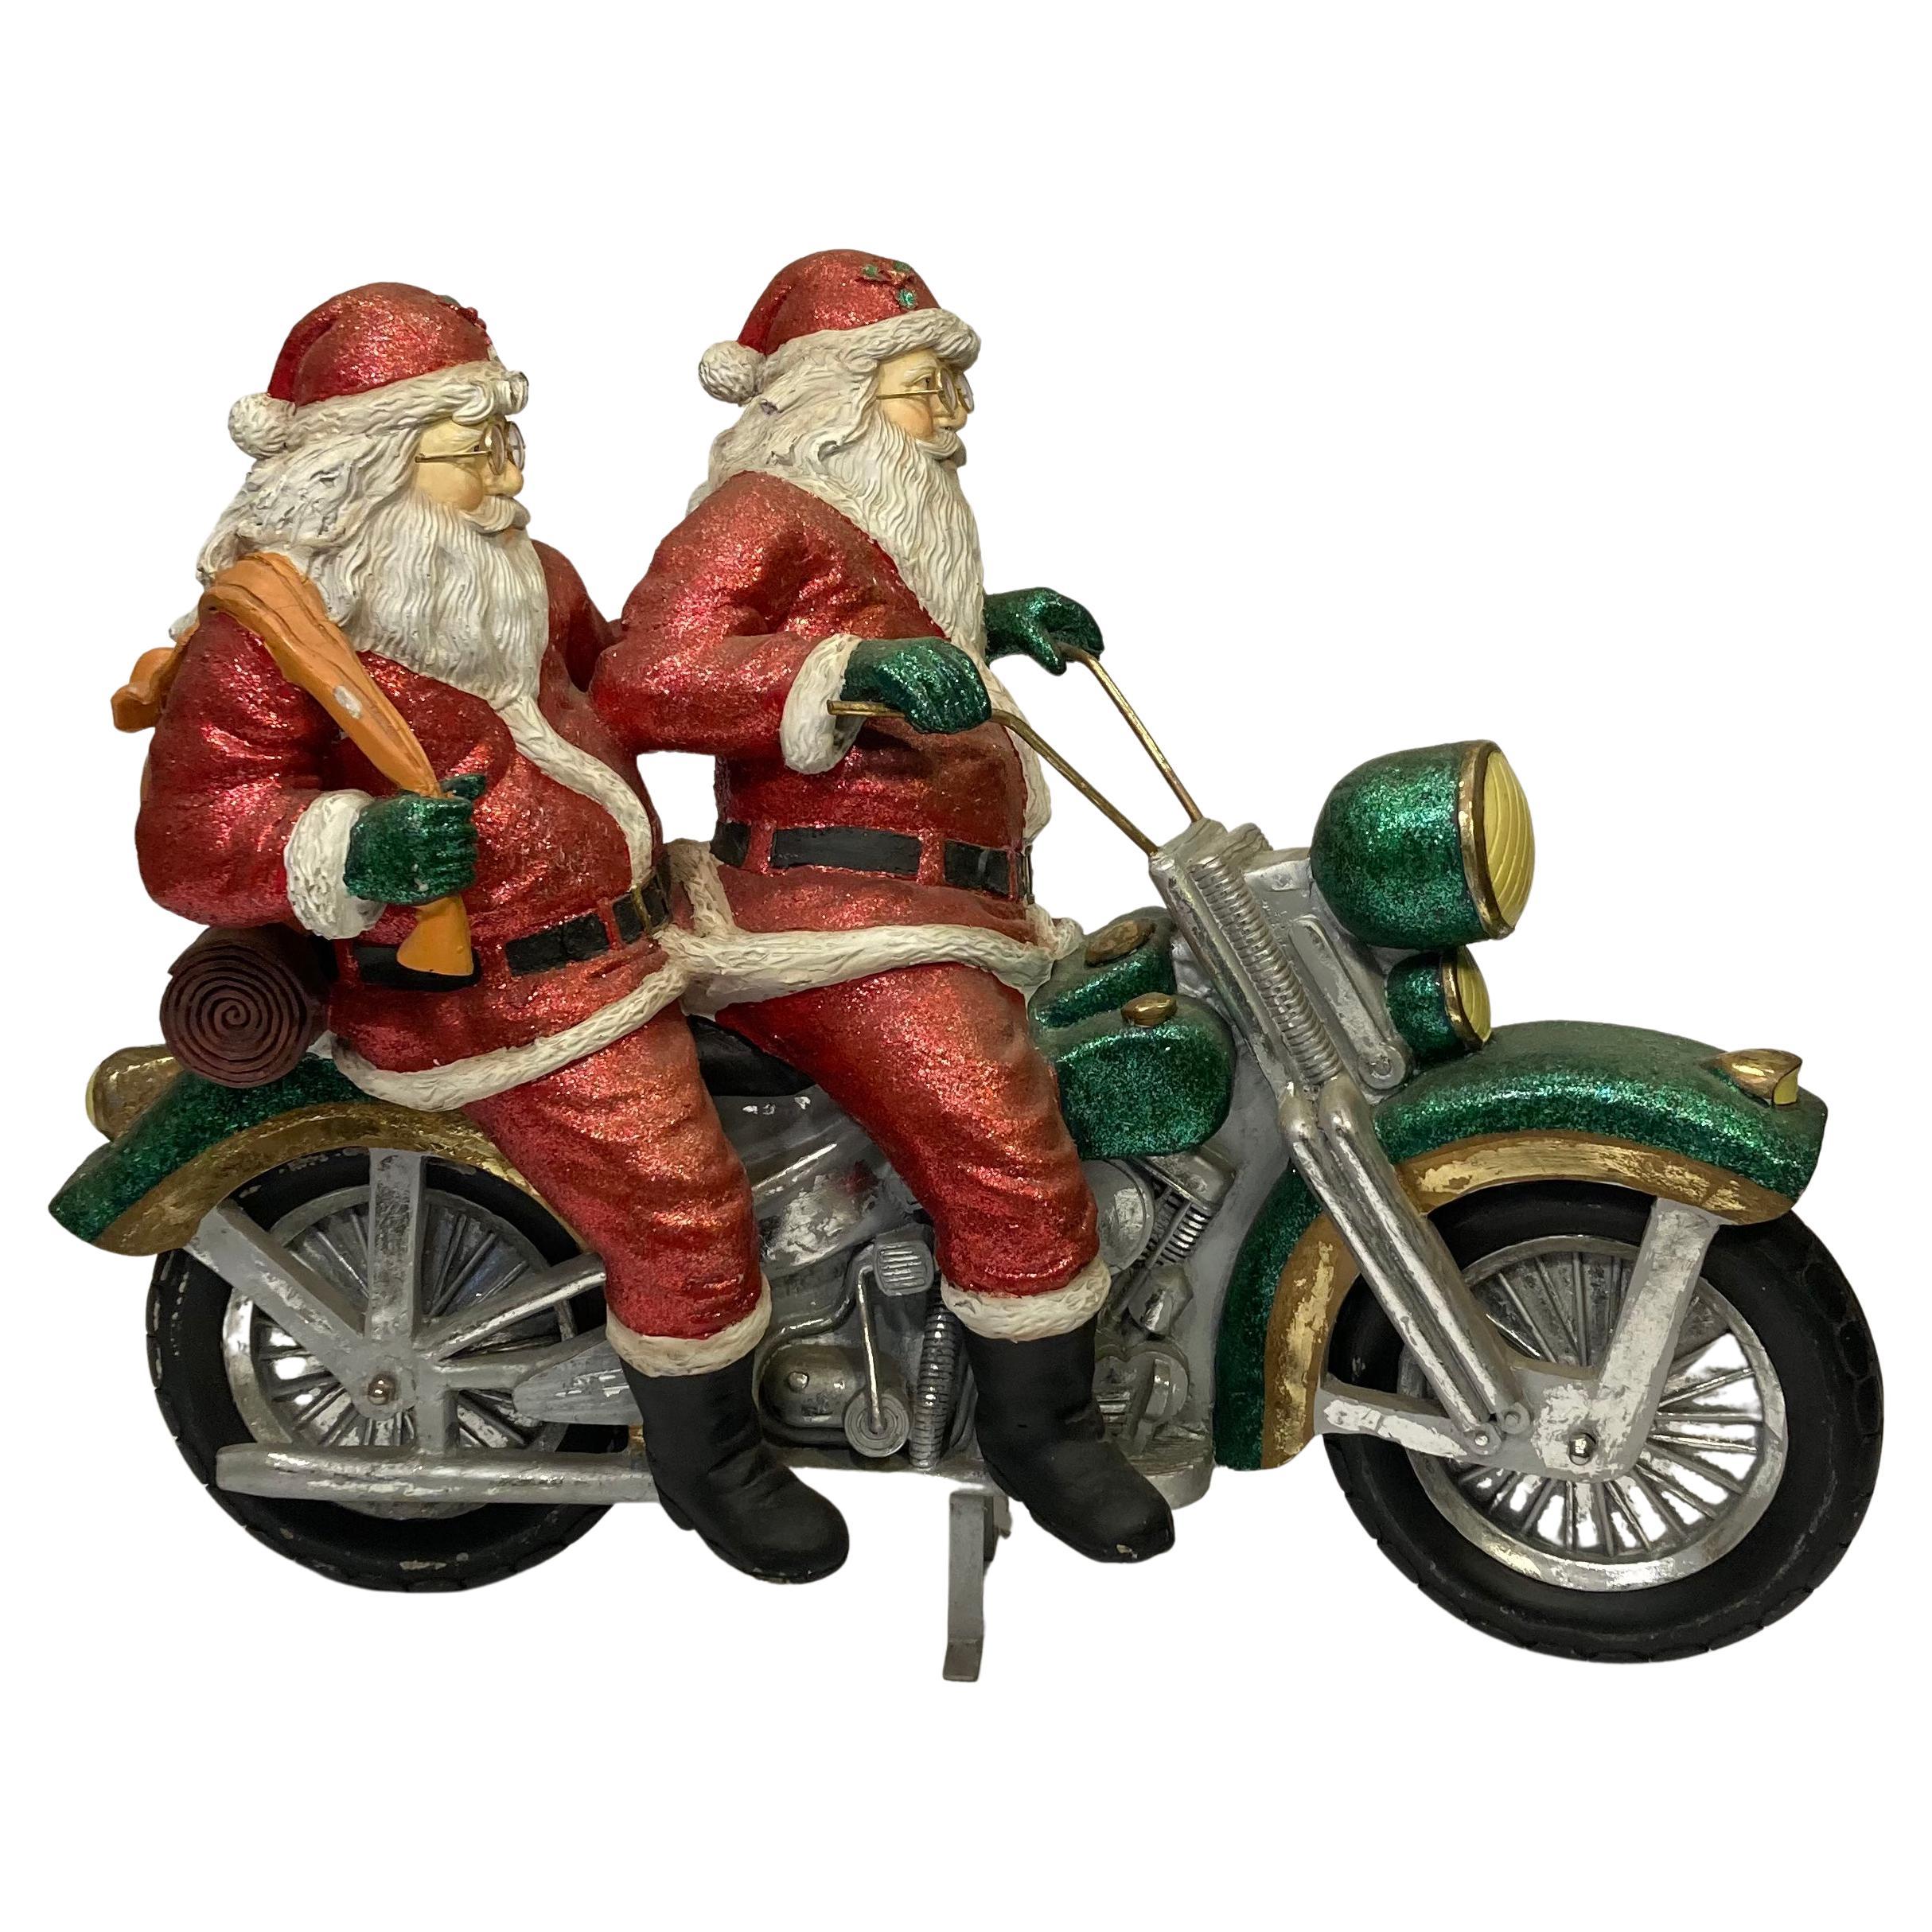 Retro Christmas Sculpture of Two Santa Clauses on Motorcycle 